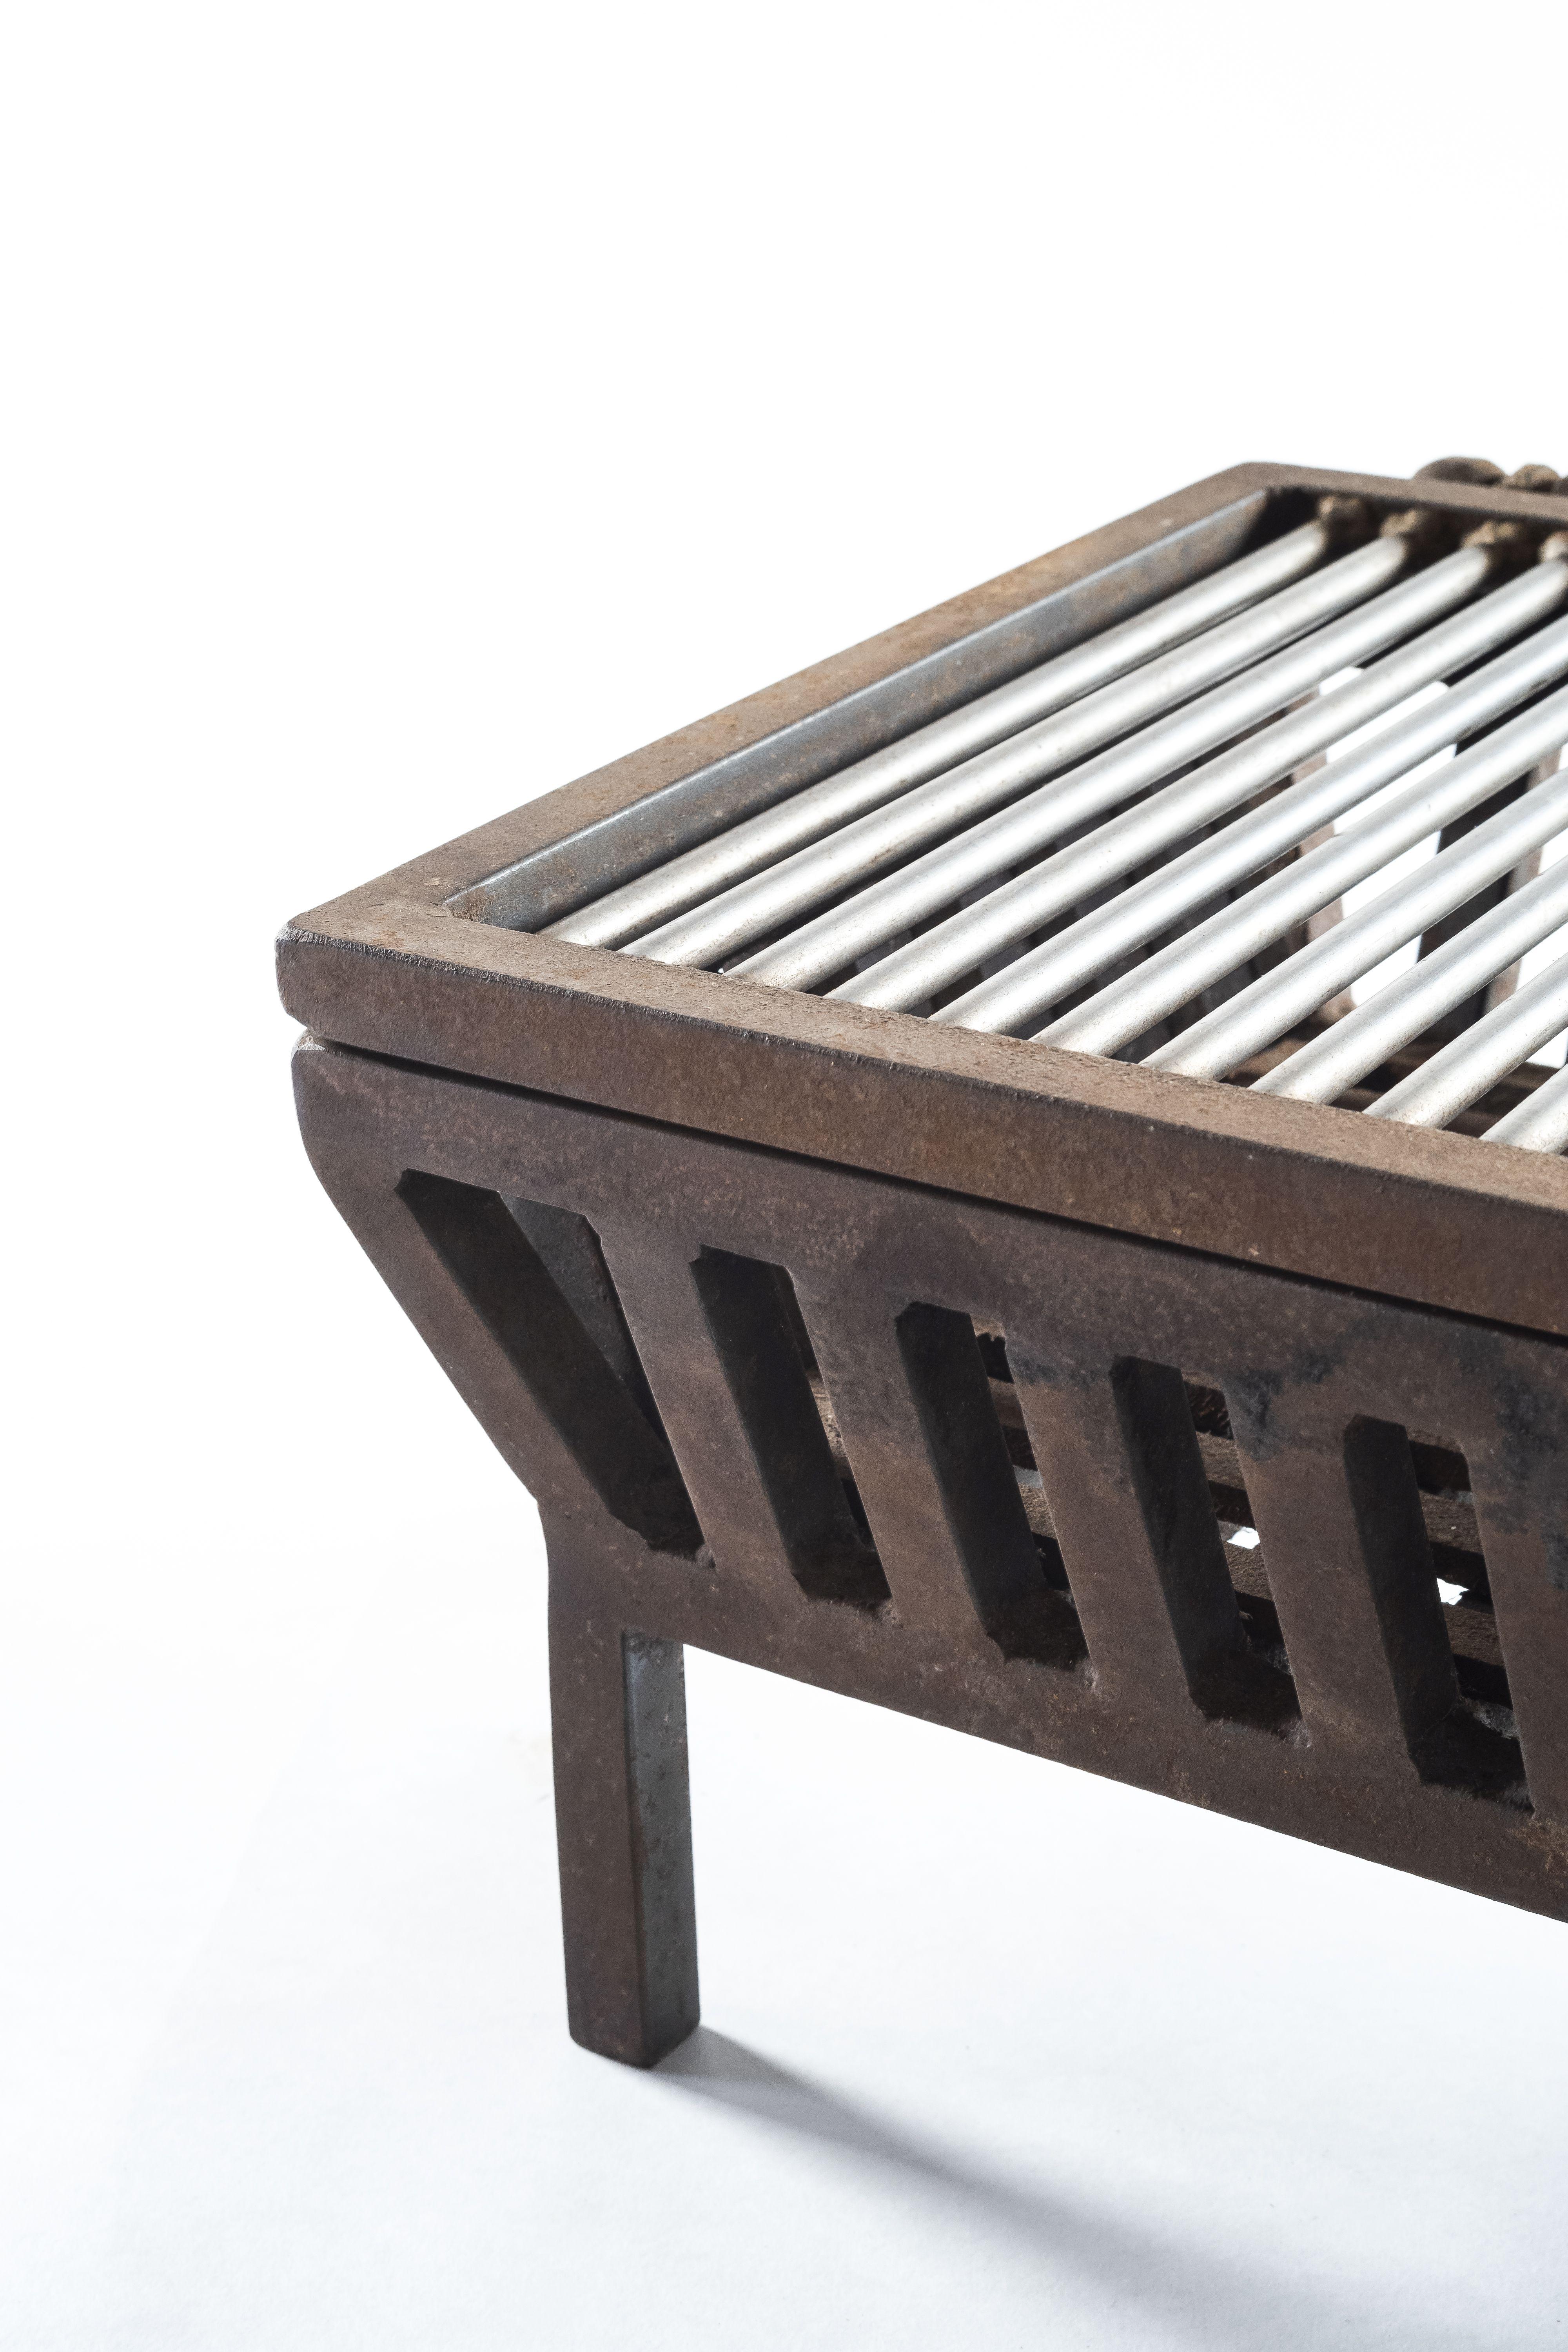 metal grate for fire pit